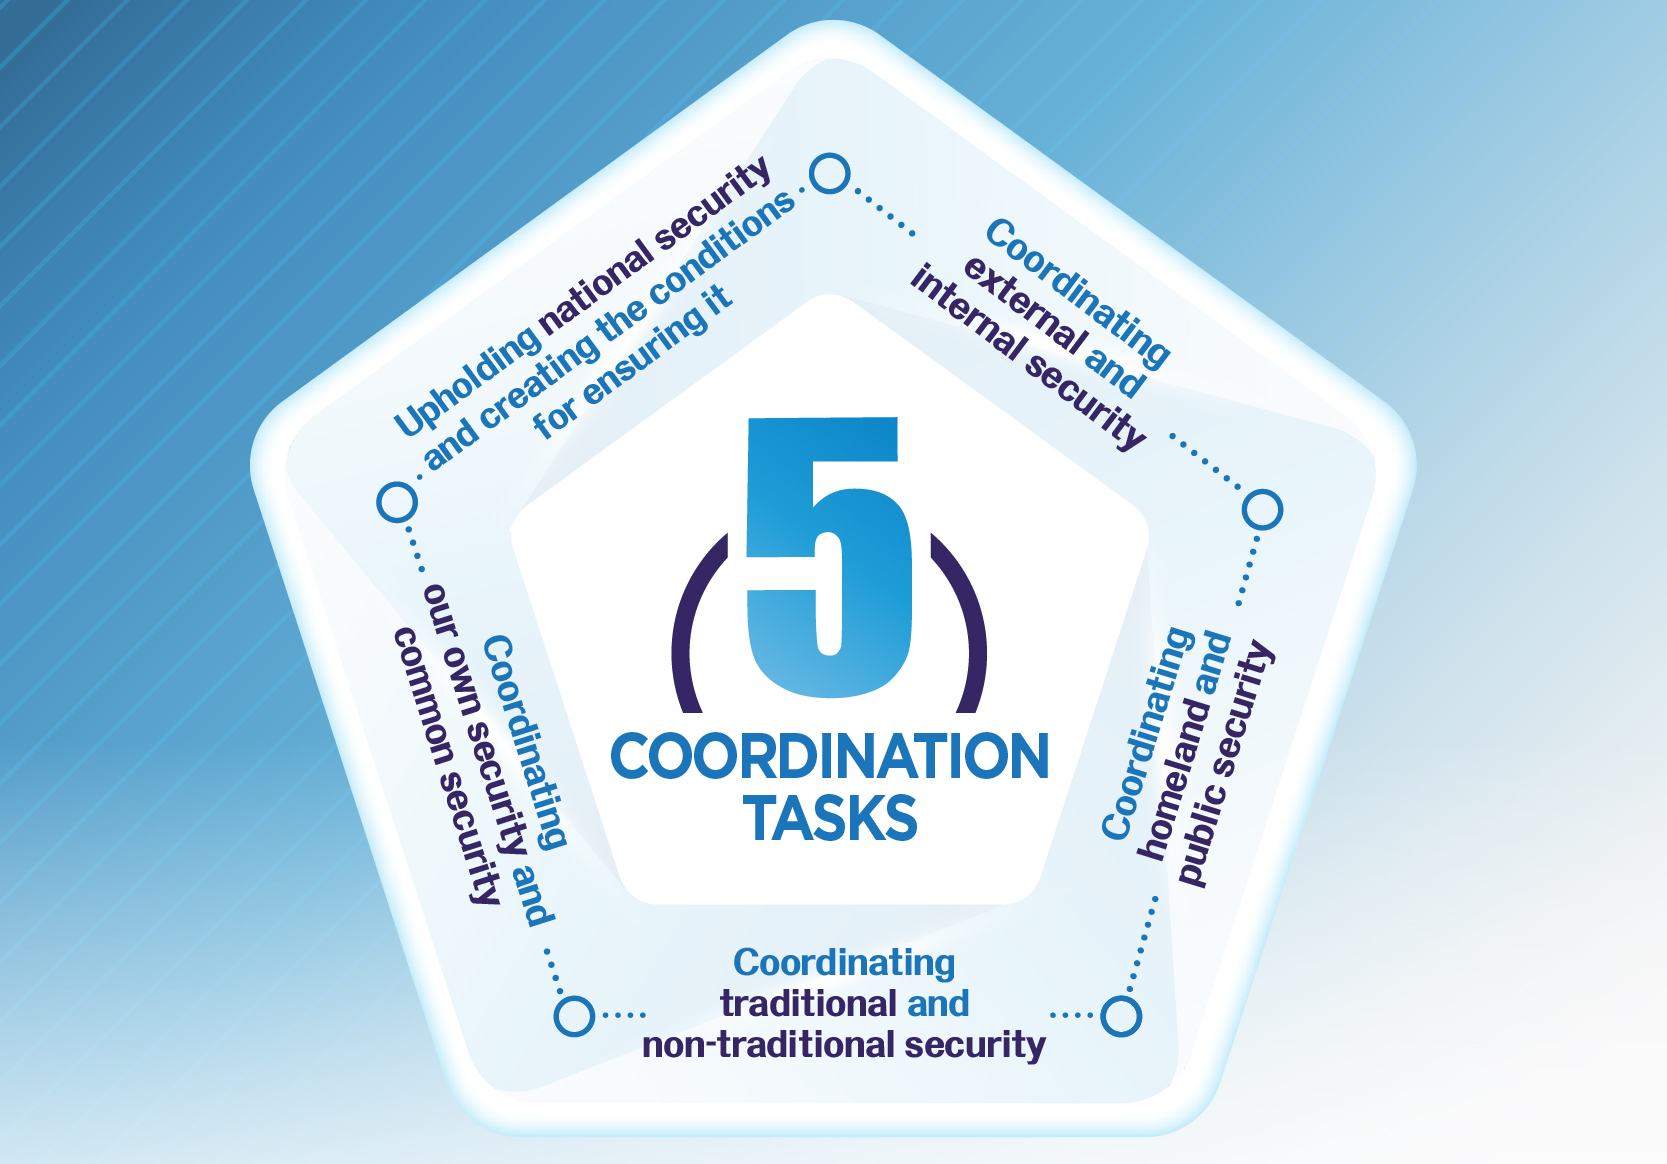 Five Coordination Tasks of A Holistic Approach to National Security